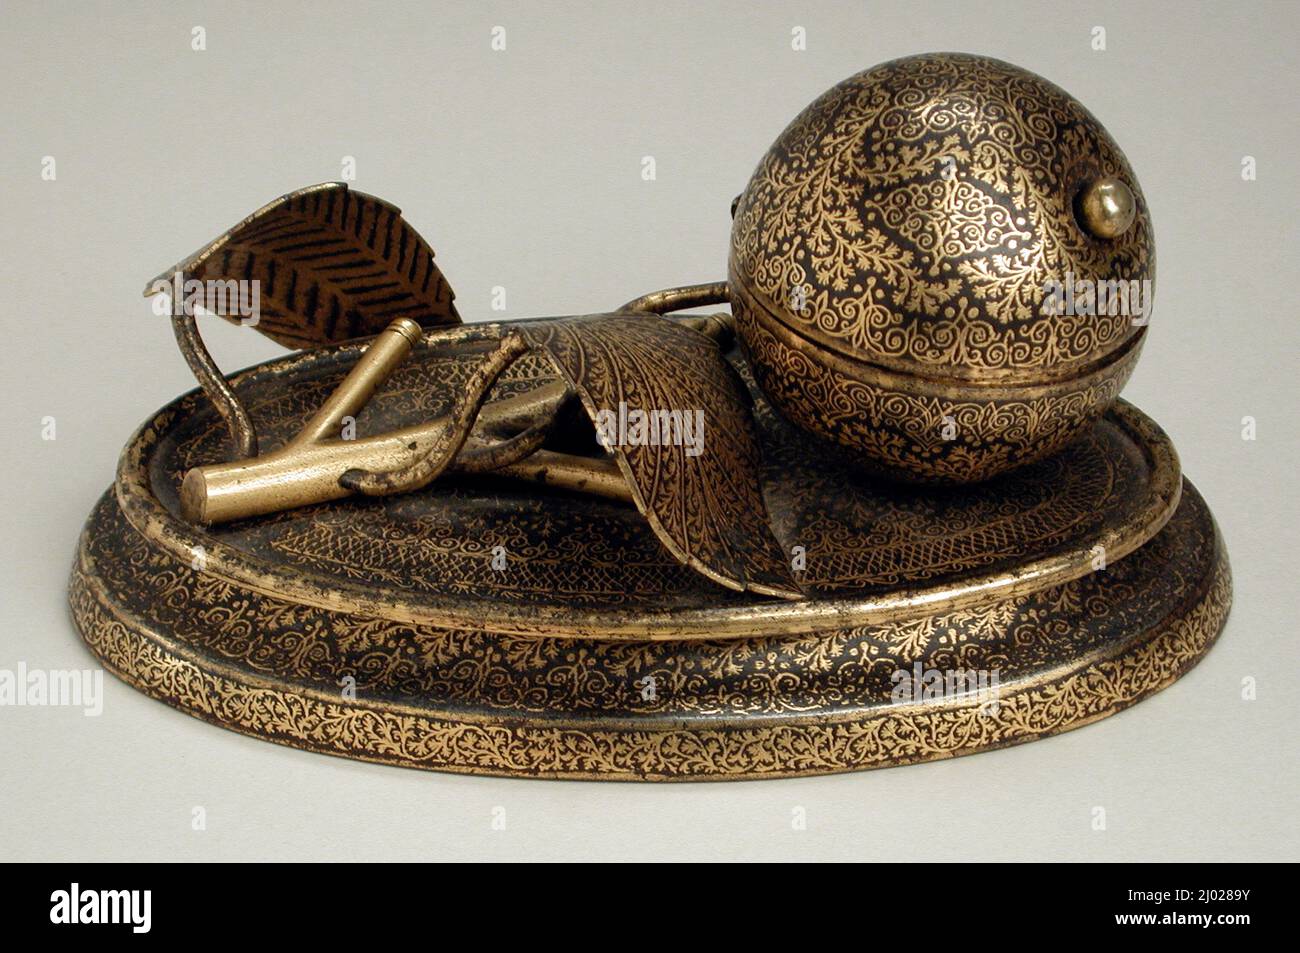 Inkstand. Pakistan, Panjab, Sialkot or Gujrat, Kotli Loharan, circa 1850-1870. Tools and Equipment; stands. Iron overlaid with gold wire Stock Photo